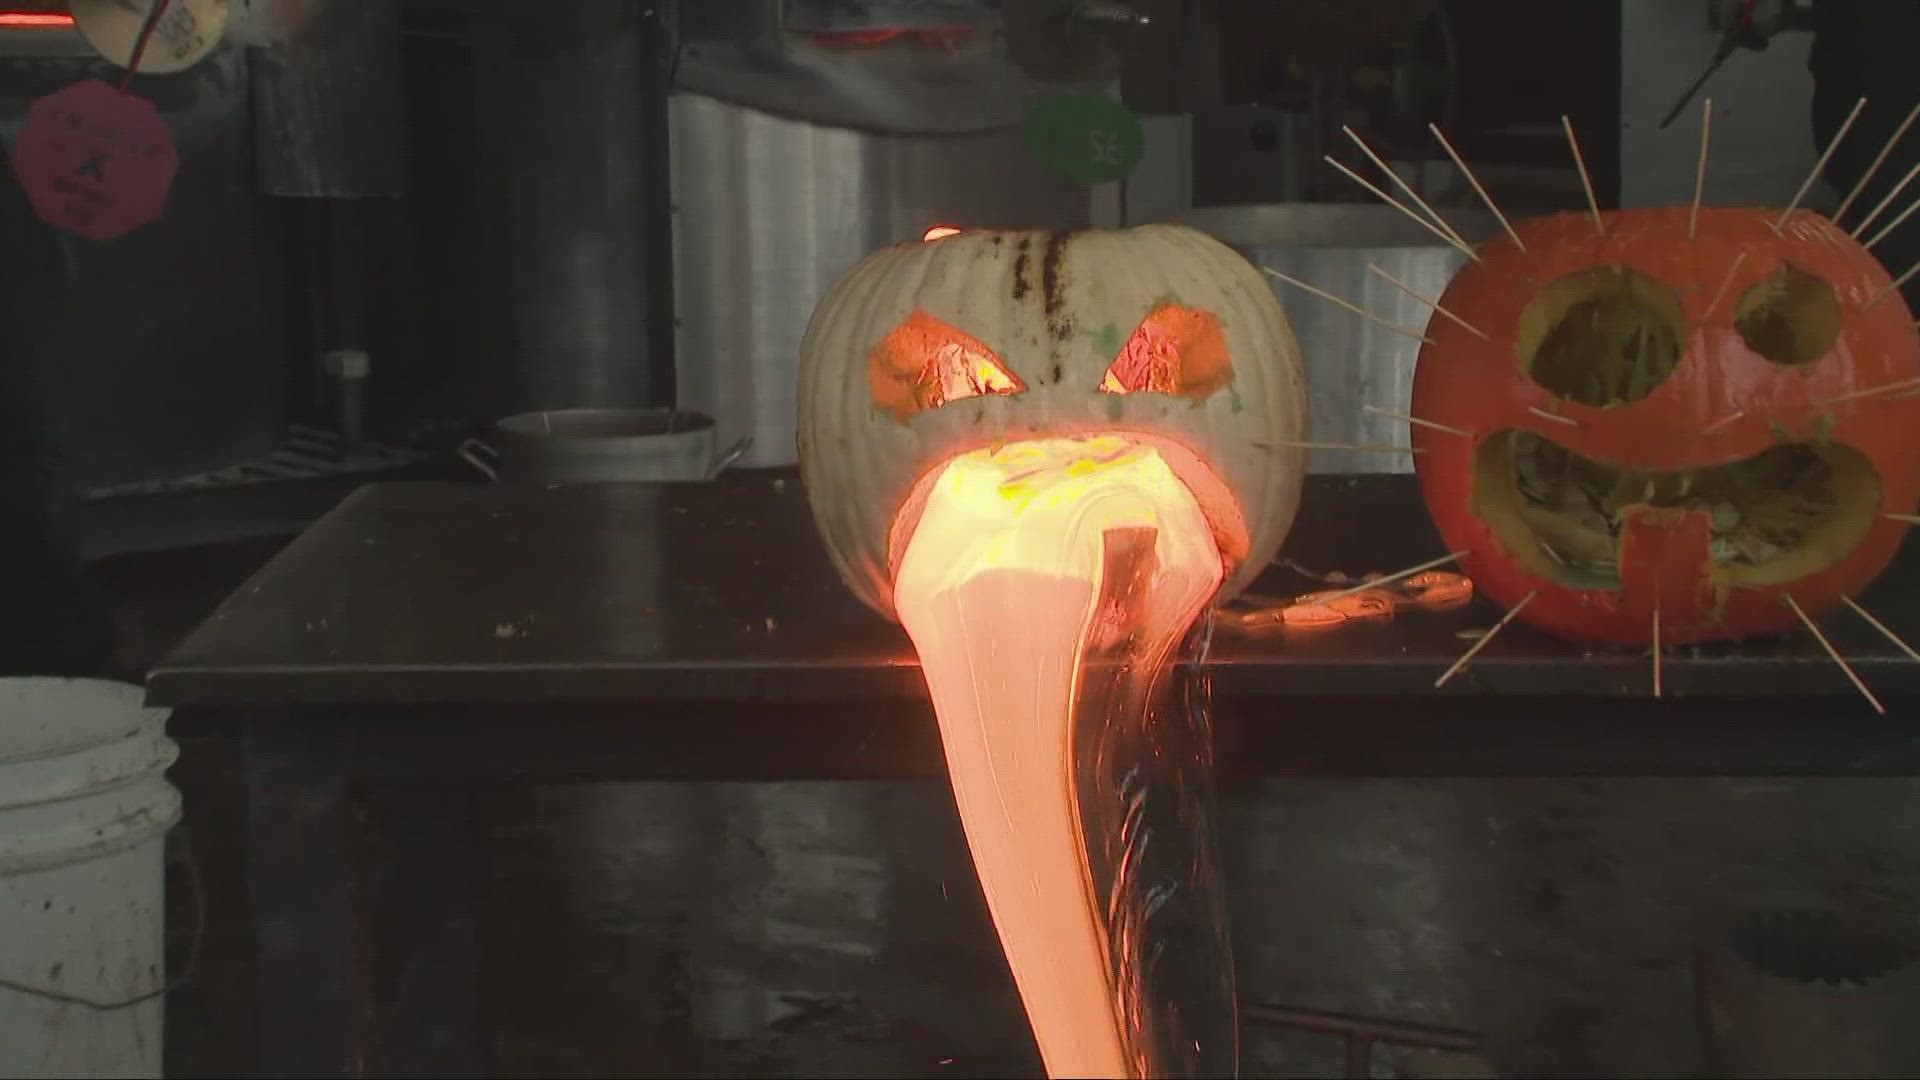 Students at the Cleveland Institute of Art took Jack-o-lanterns to a whole new level.